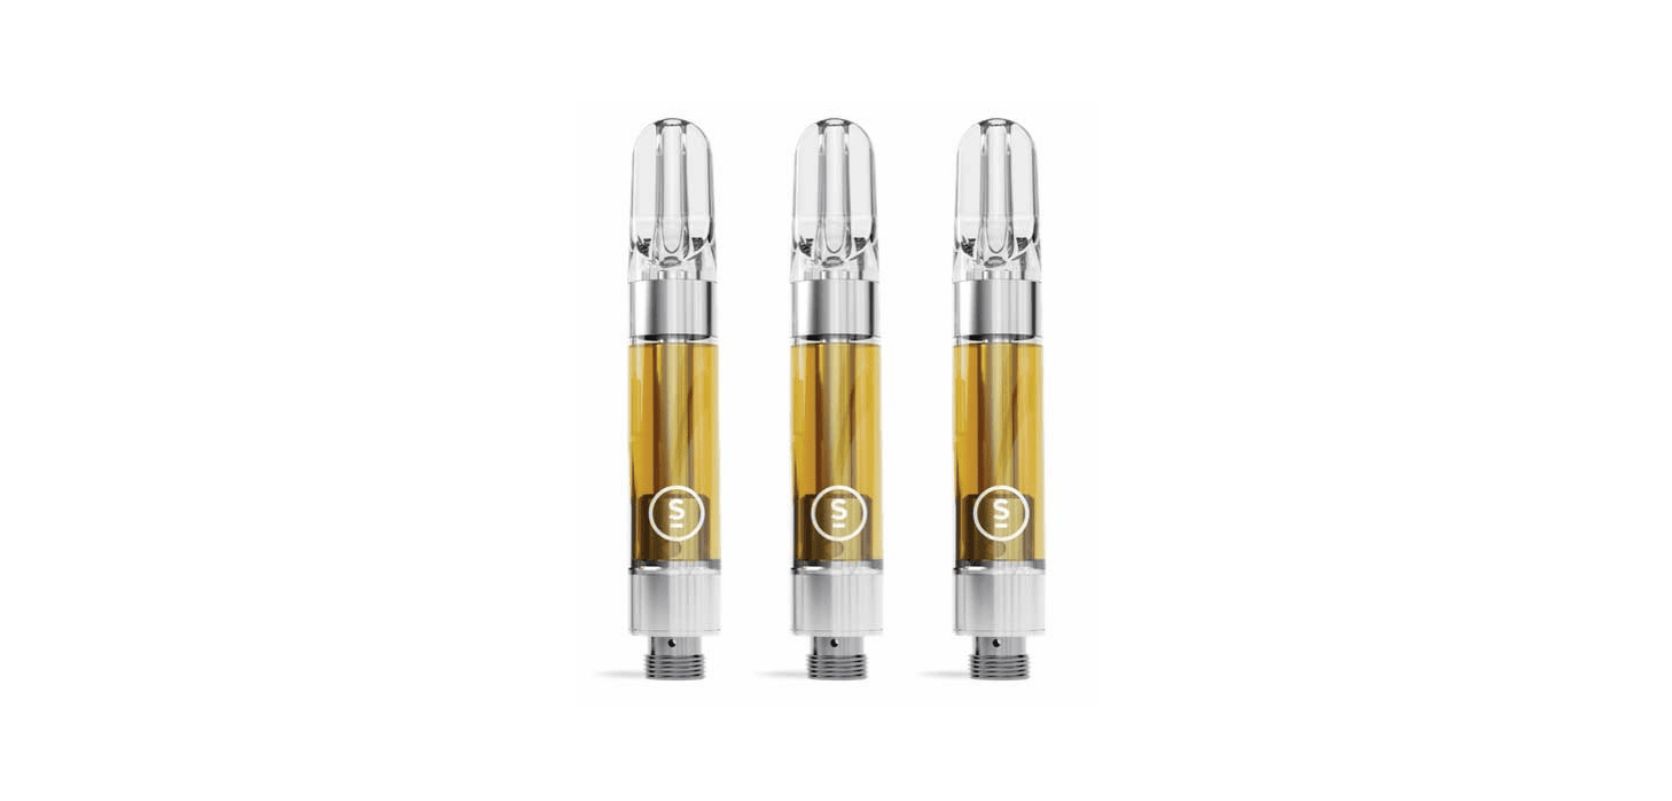 A dab pen cartridge is a small cylindrical container designed to hold semi-solid concentrates/extracts like wax, live resin, or shatter.